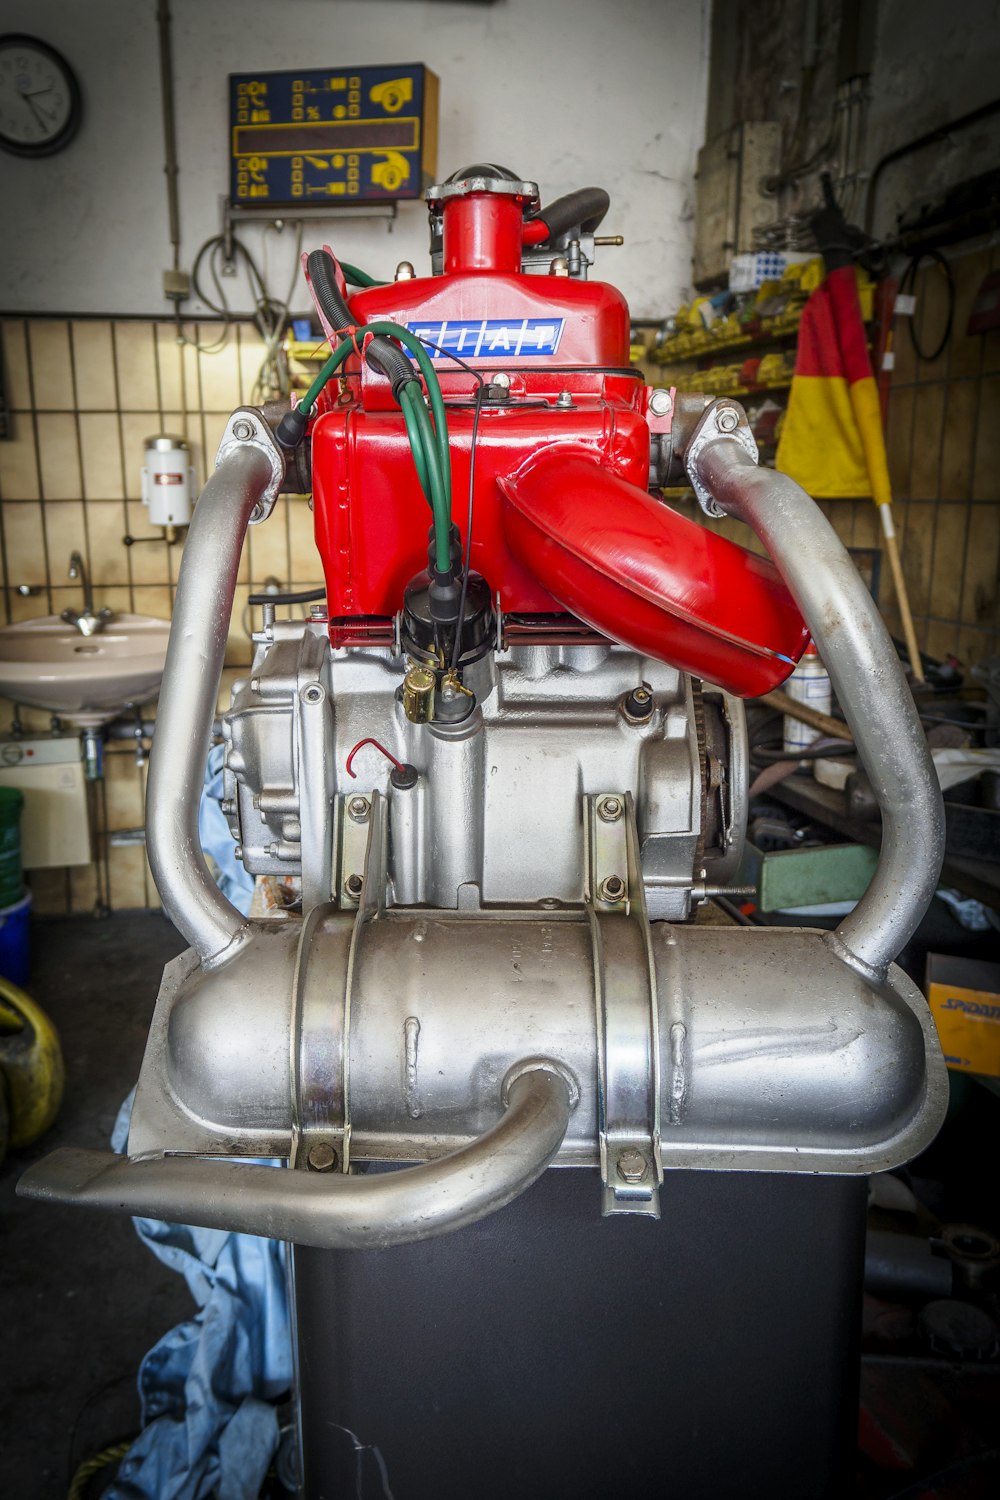 a close up of a red engine in a garage